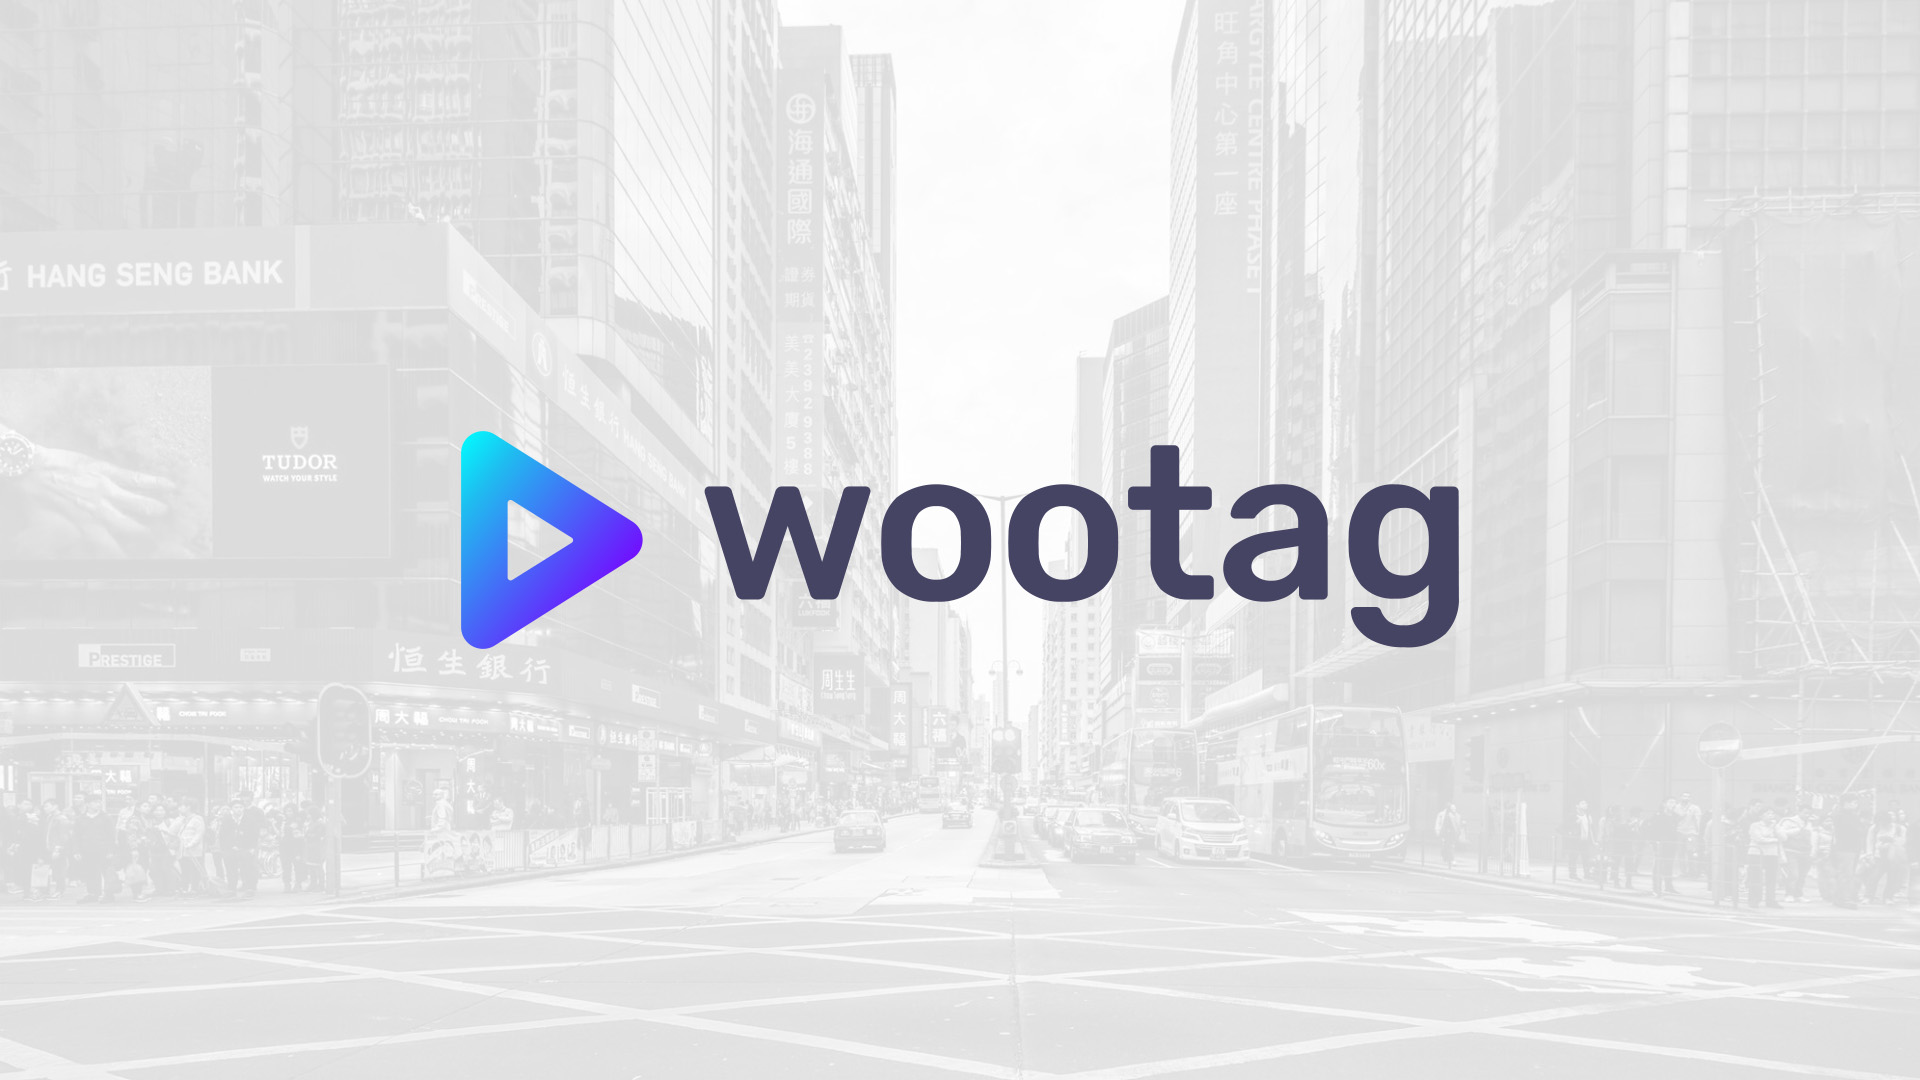 Wootag launches operation in Hong Kong